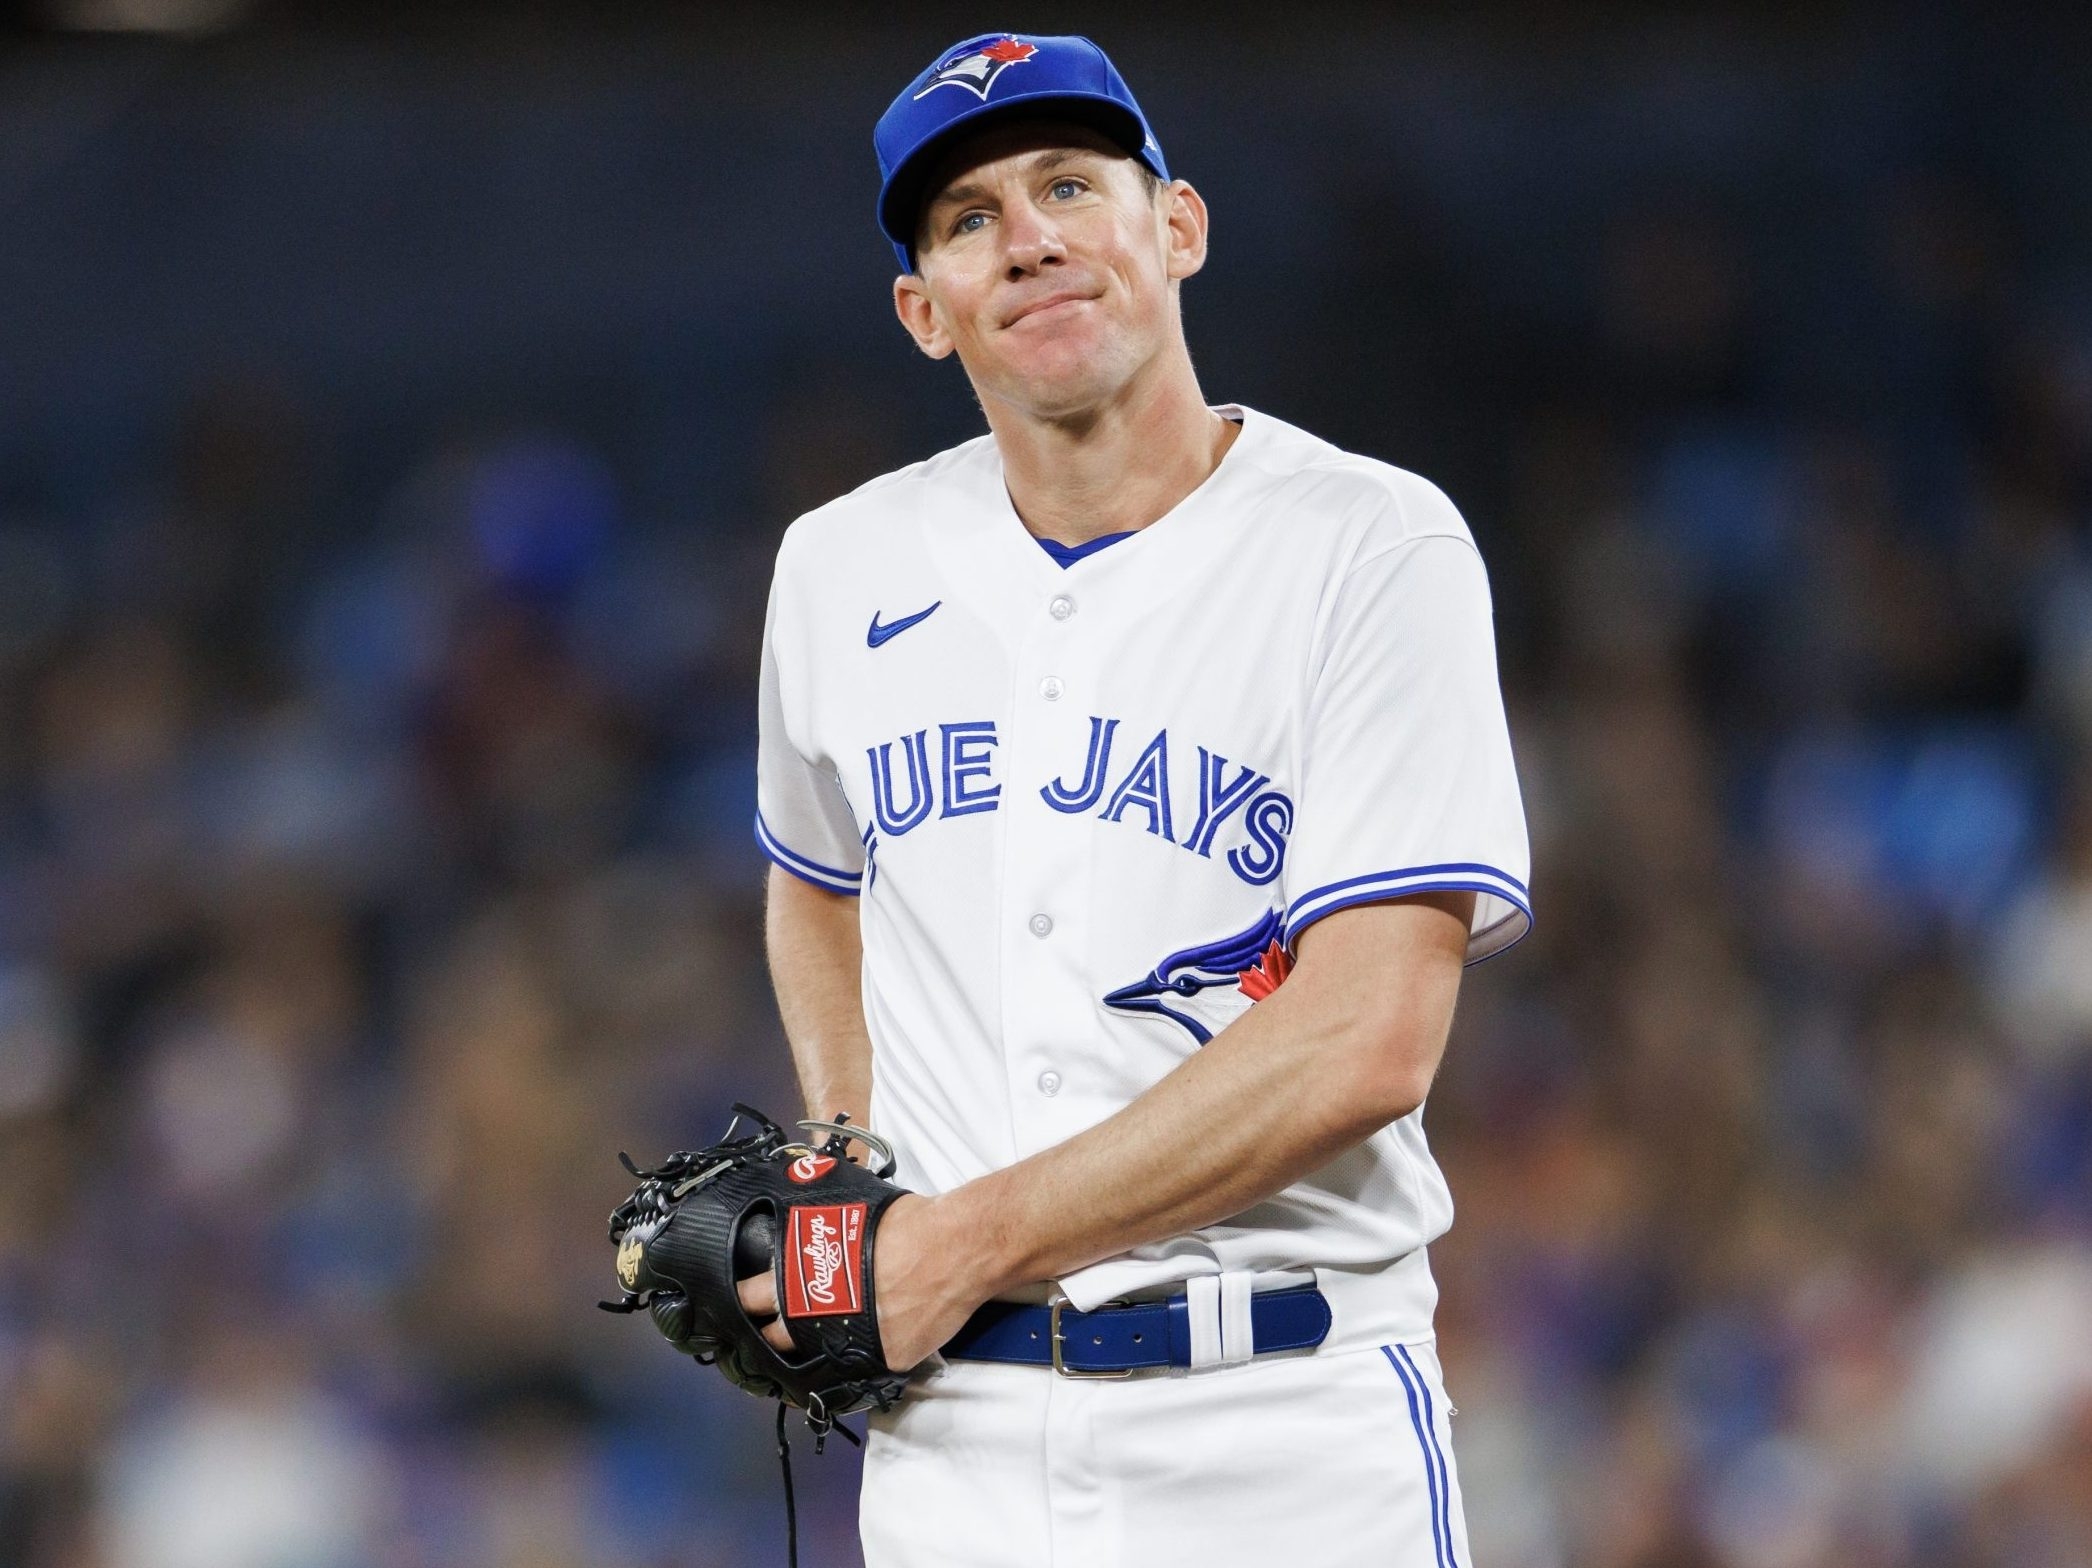 Collector strikes out after paying $3,300 for phoney Blue Jays